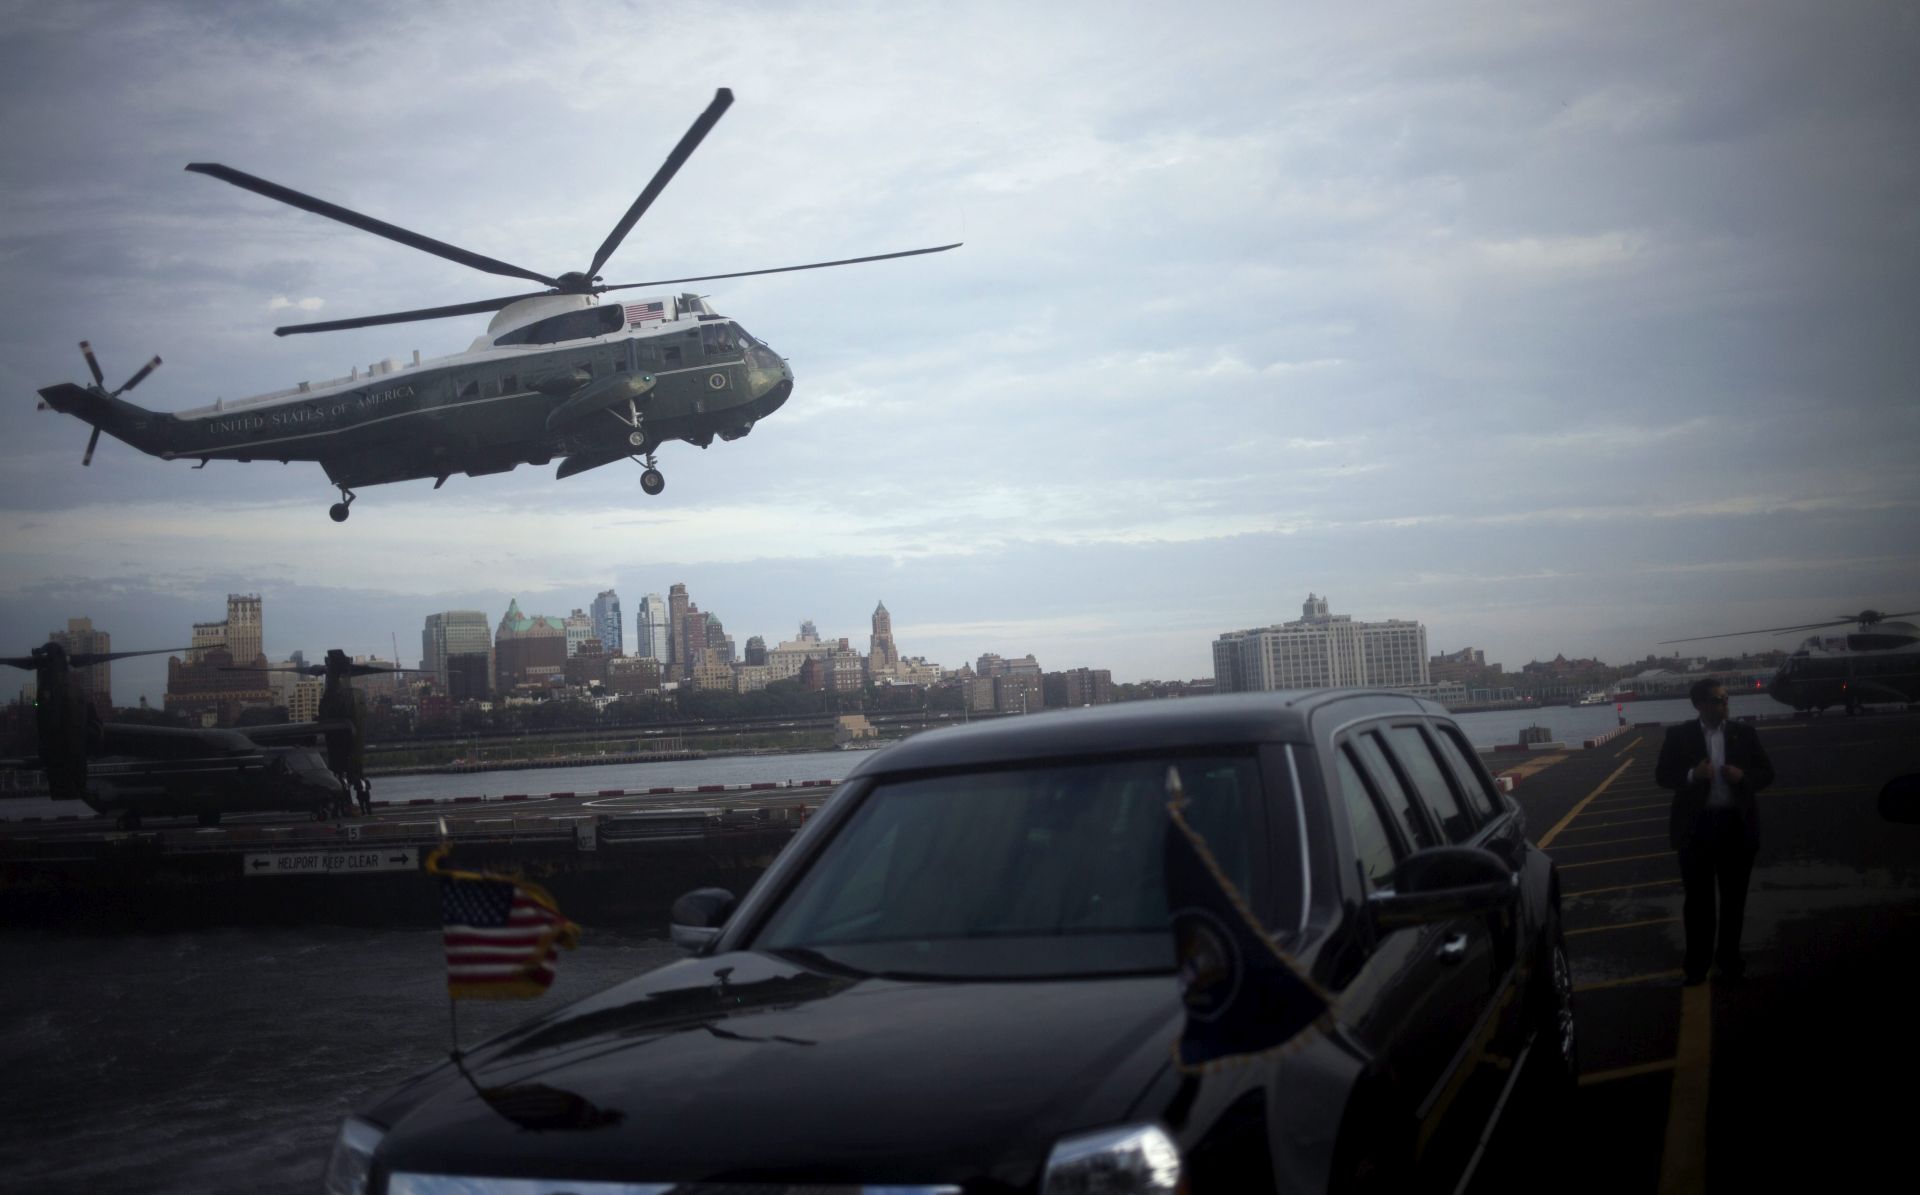 epa05547023 US President Barack Obama arrives in Marine One ahead of the General Assembly at the United Nations (UN) headquarters in New York, New York, USA, 18 September 2016. Obama will address the 71st UN General Assembly Tuesday in his last major appearance at the gathering of world leaders.  EPA/JOHN TAGGART / BLOOMBERG / POOL